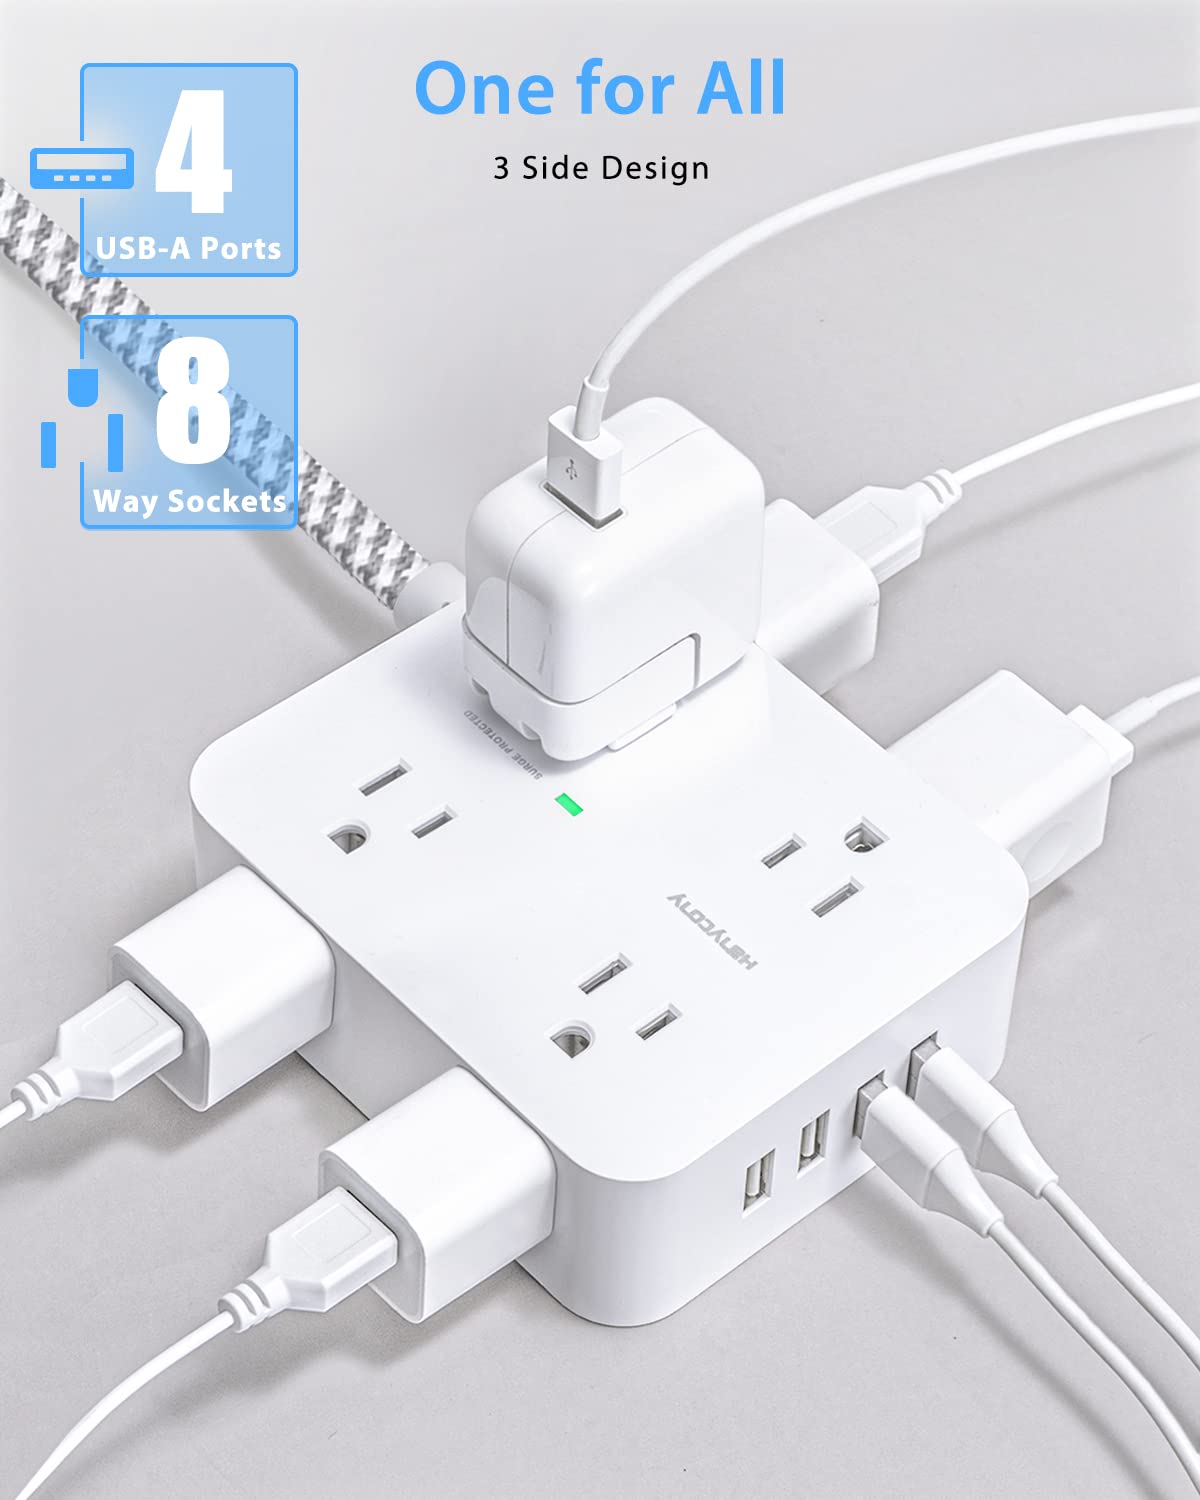 Surge Protector Power Strip - 8 Widely Outlets with 4 USB Charging Ports, Multi Plug Outlet Extender with 5Ft Braided Extension Cord, Flat Plug Wall Mount Desk USB Charging Station for Home Office ETL